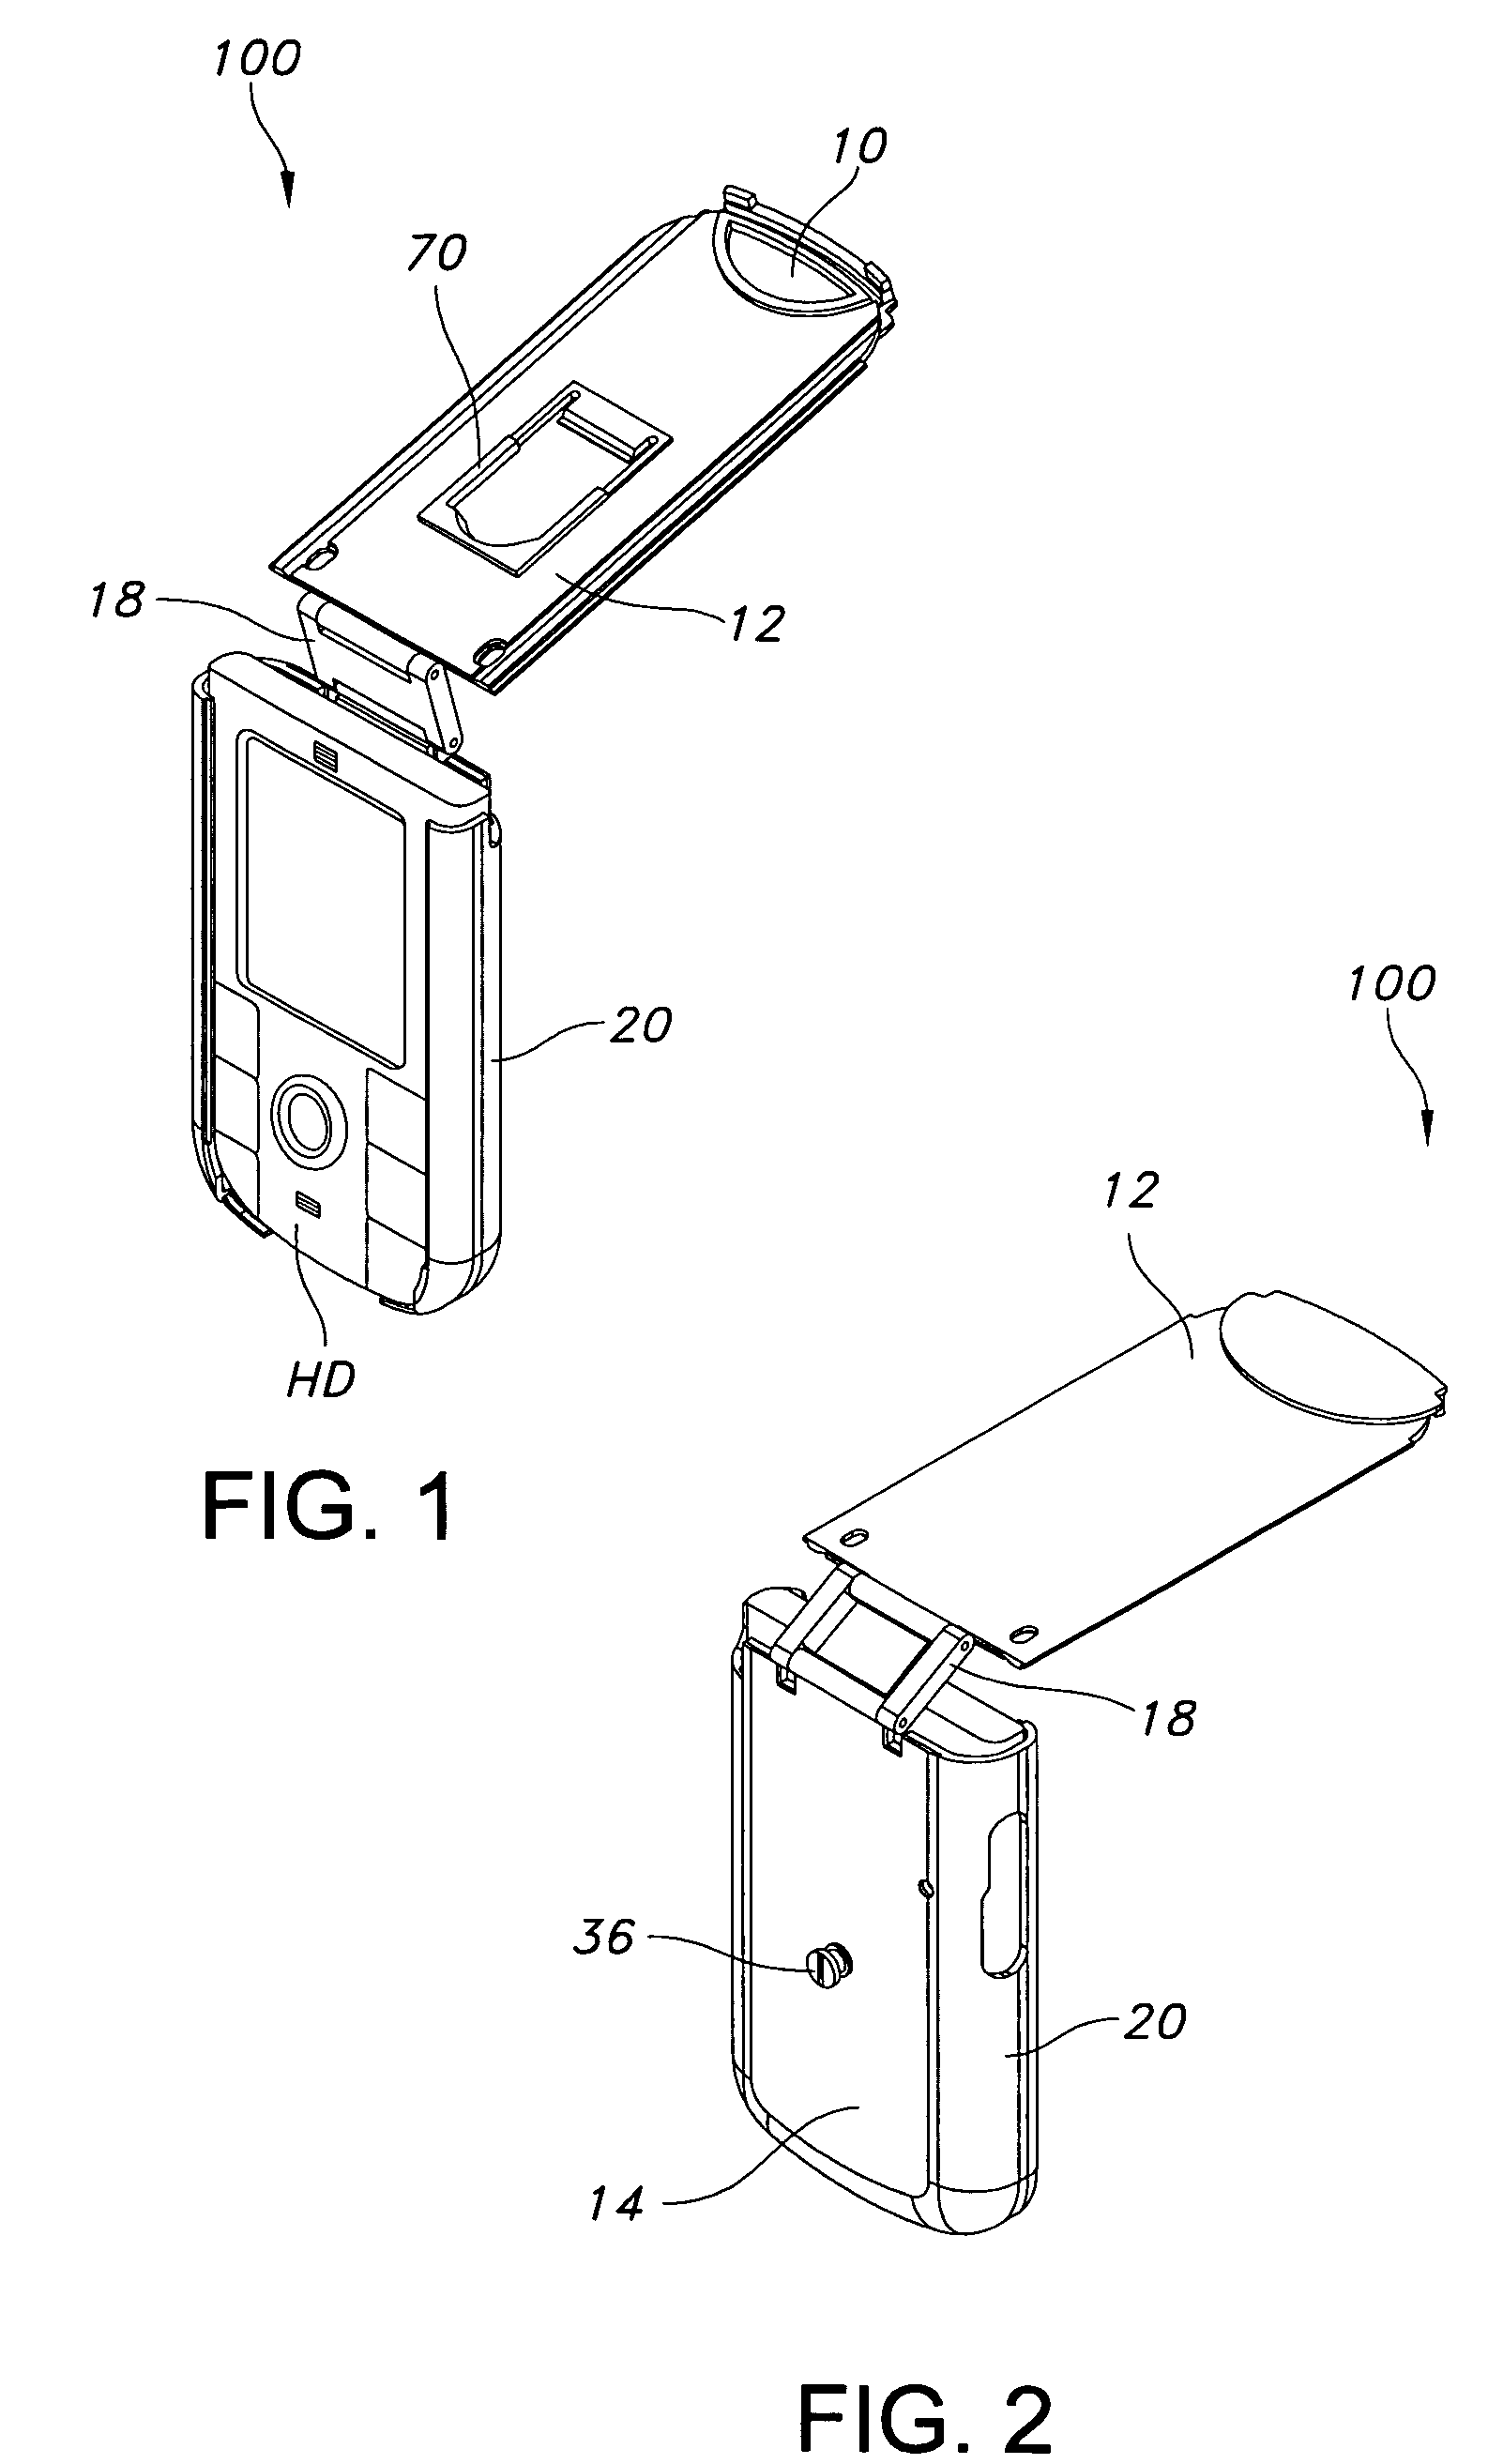 Water-resistant combination case for handheld electronic devices